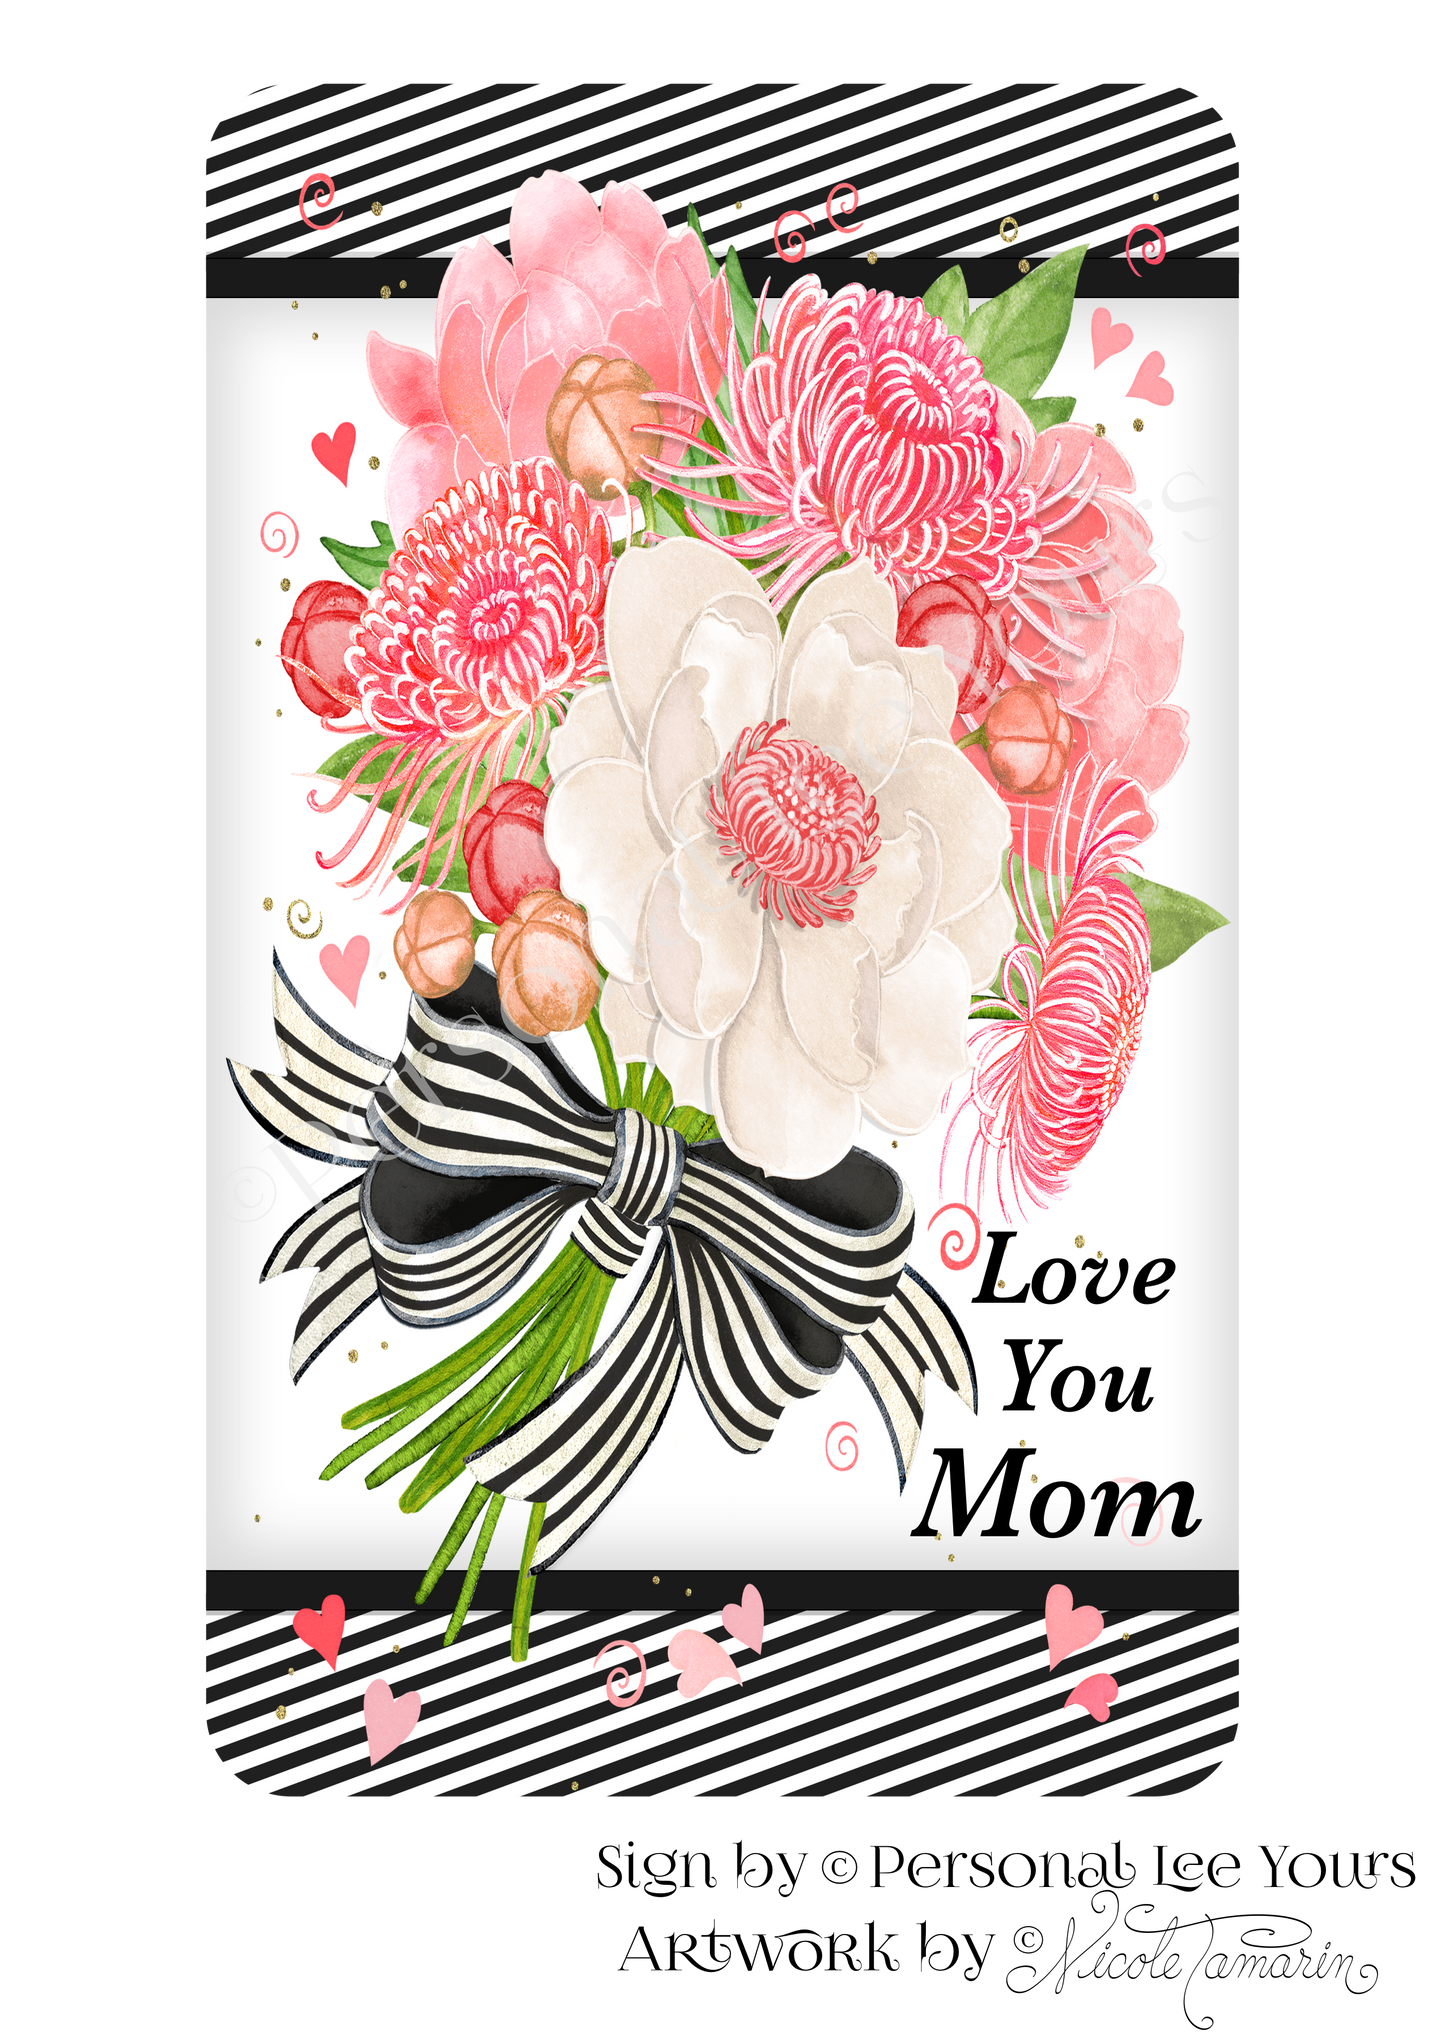 Nicole Tamarin Exclusive Sign * Love You Mom * 3 Sizes * Lightweight Metal